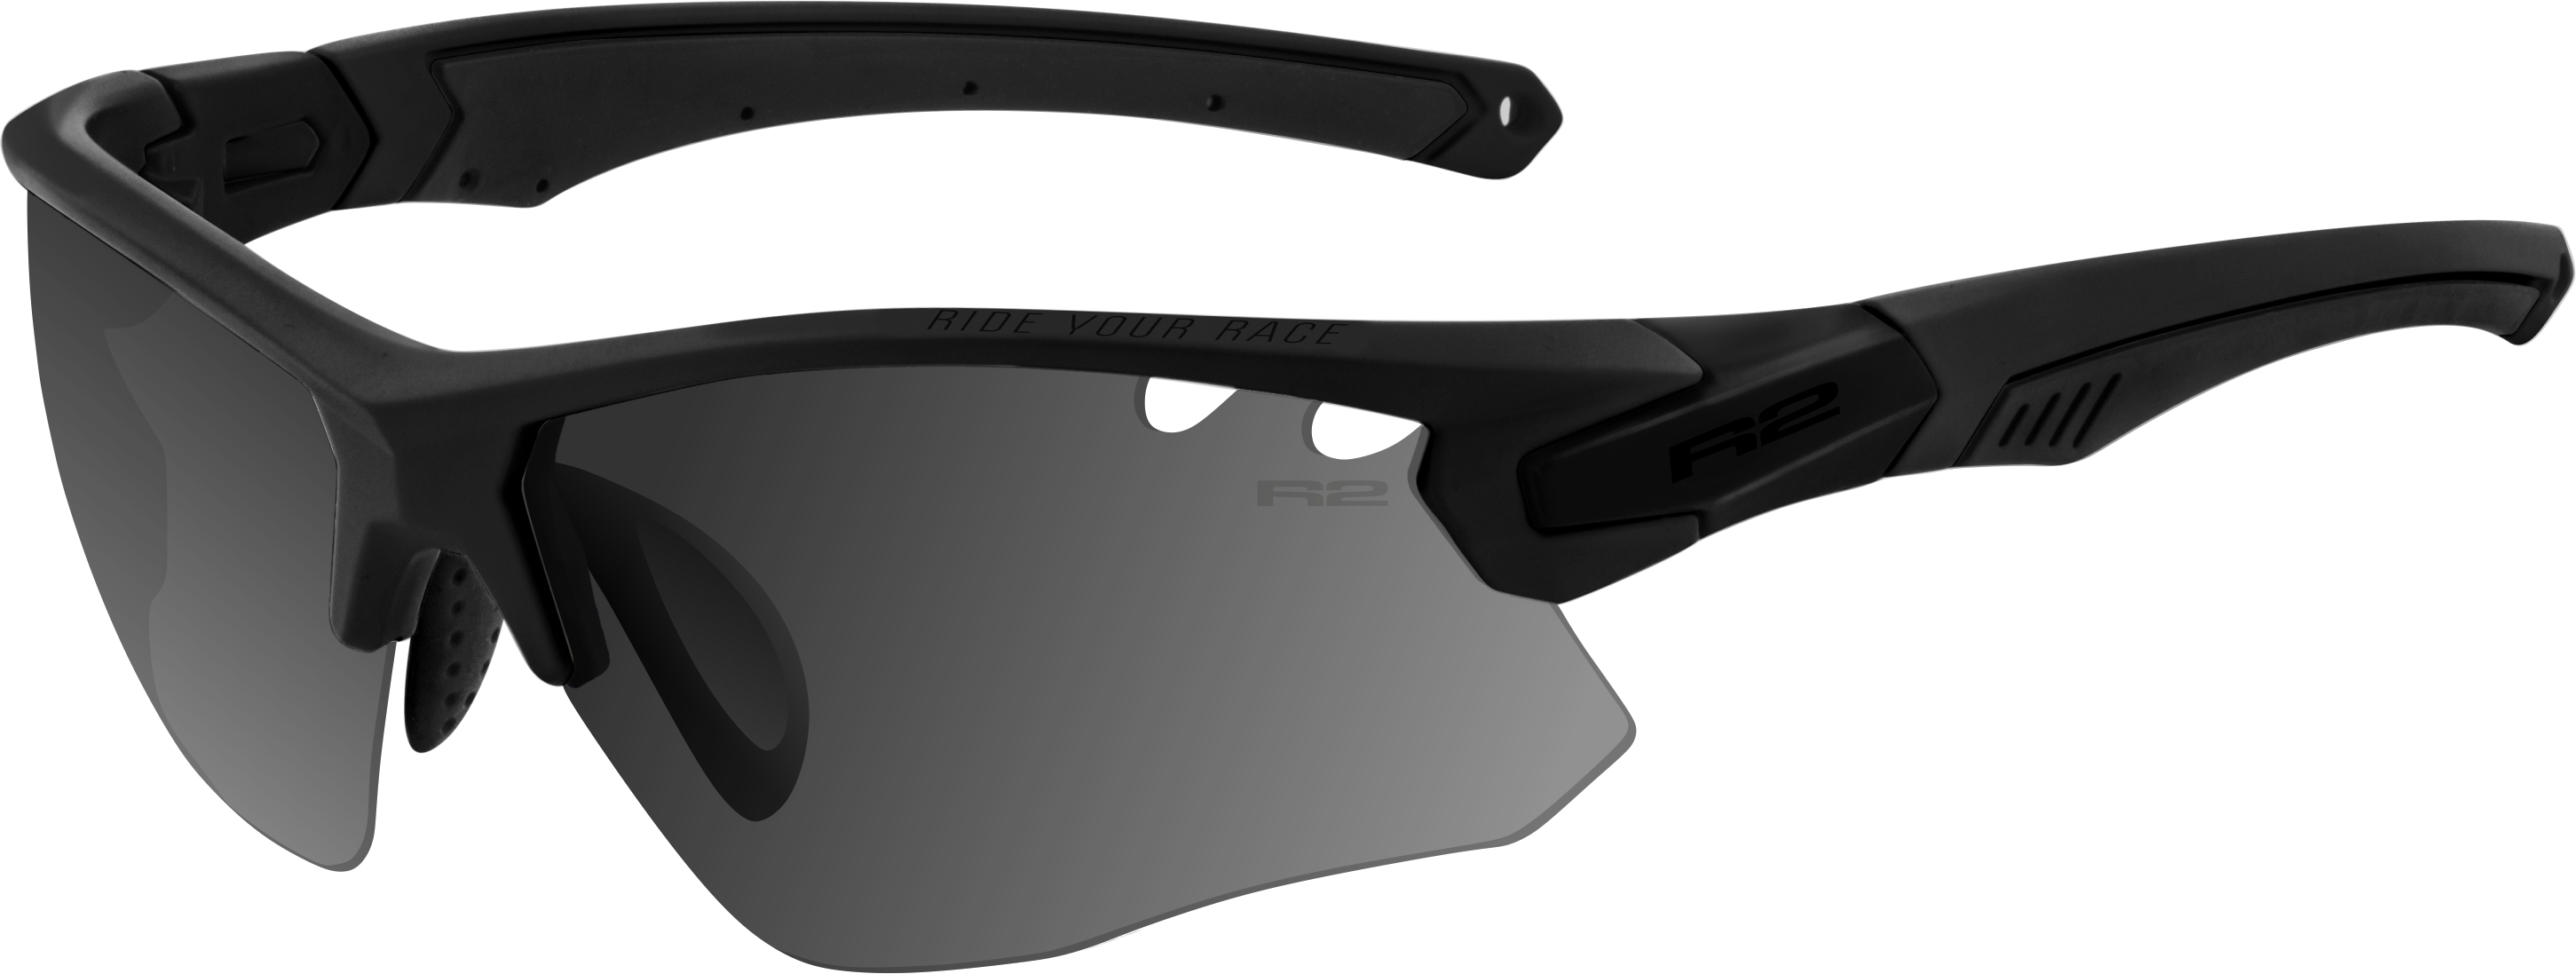 Sport sunglasses R2 CROWN AT078Z